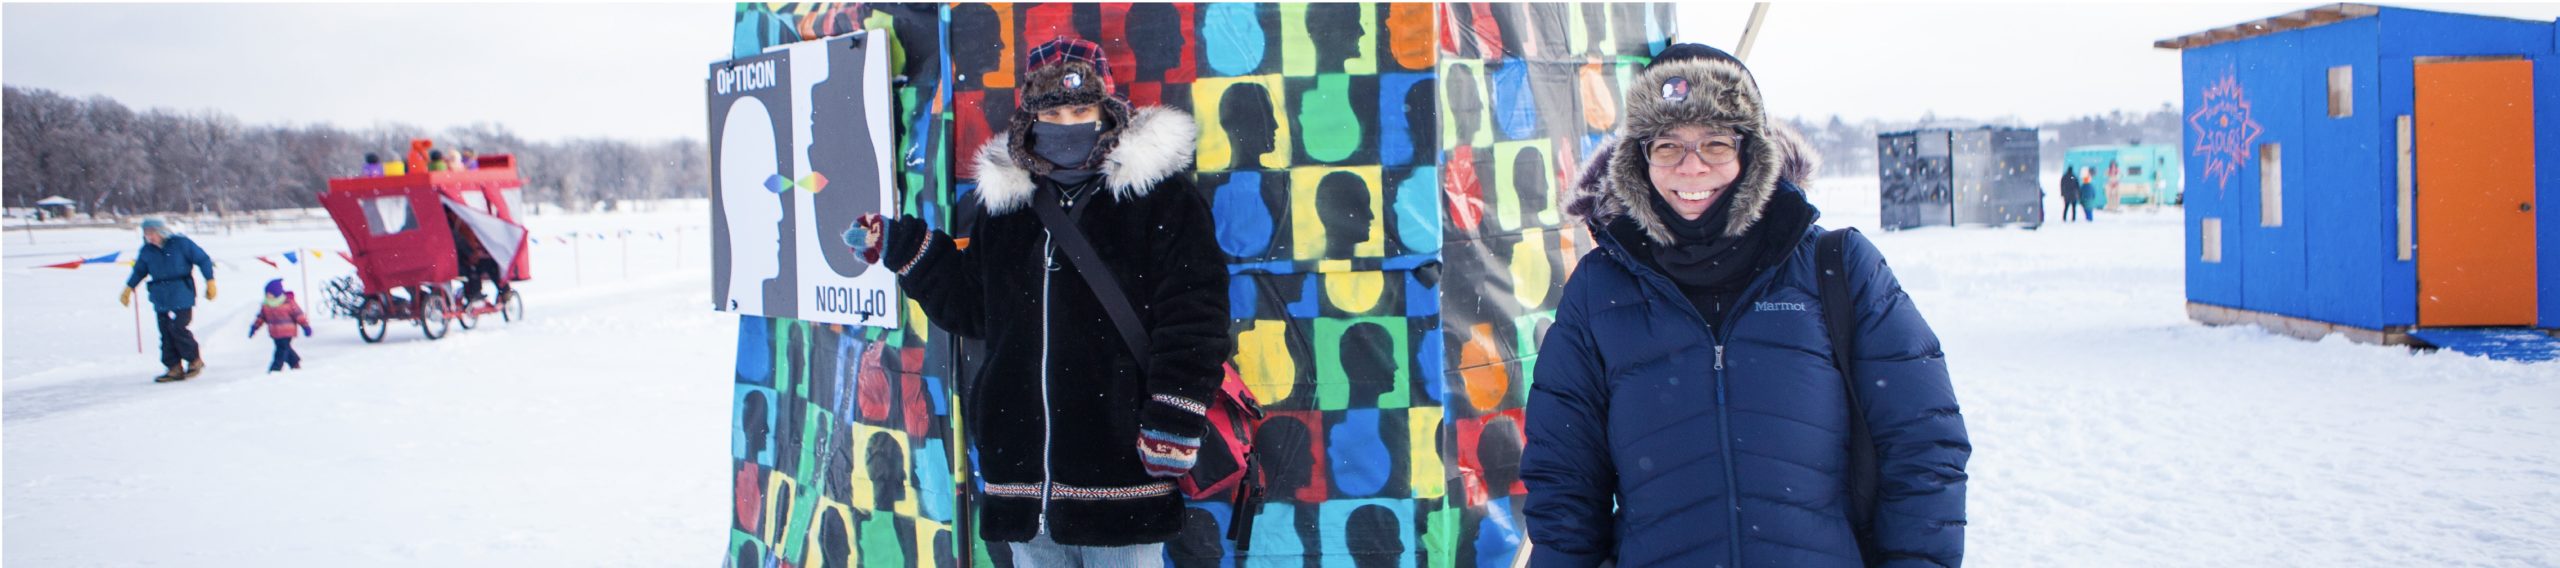 Two bundled up people greet the camera at their colorful yurt shanty